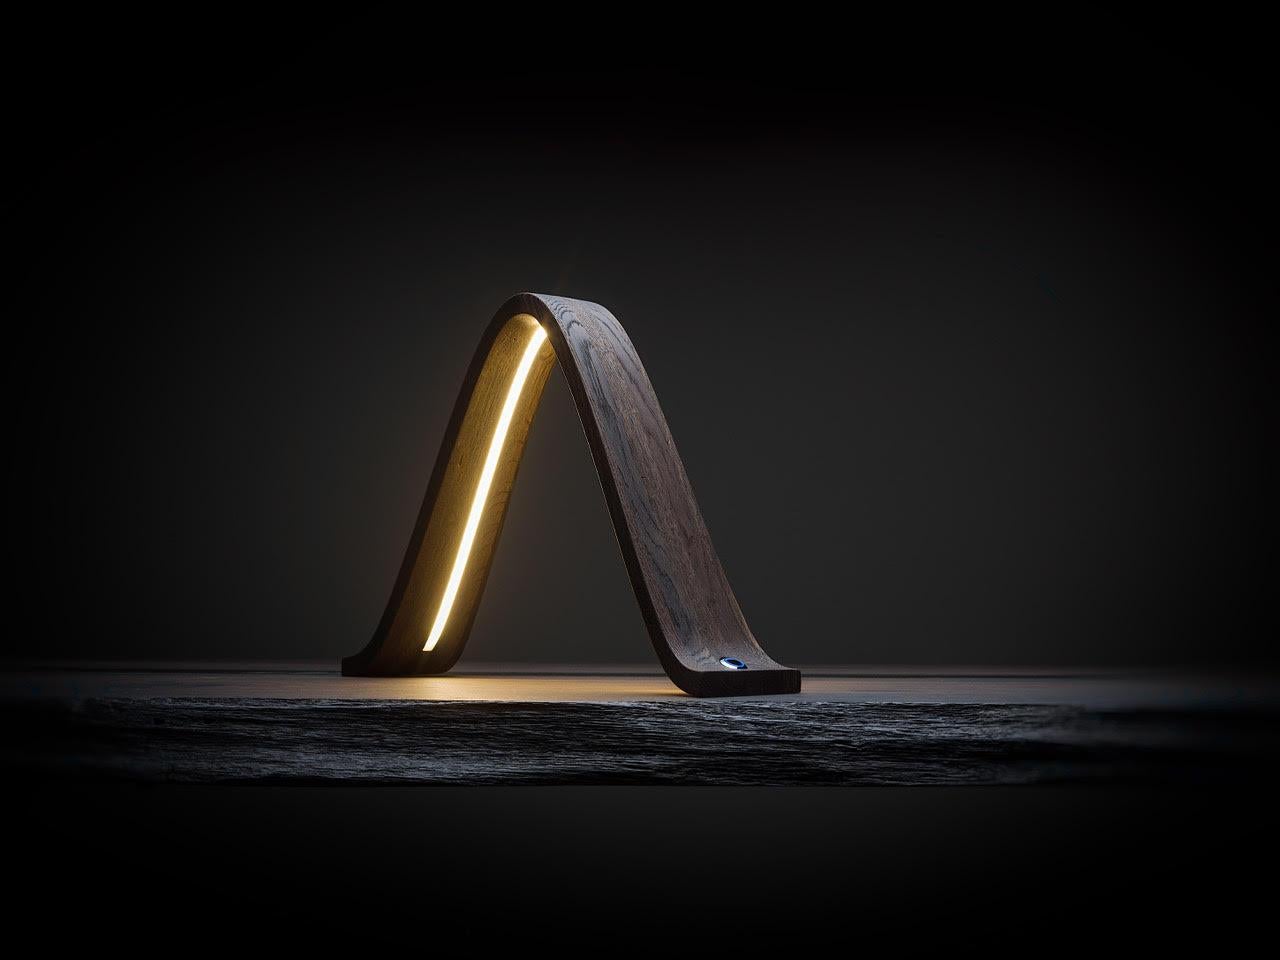 Small masterpiece of wood engineering, this lamp with sober and essential lines gives bright emotions in every corner of the rooms. The contrast of fossil wood with the diffused light of the dimmable LED line, with its elegant touch switch, creates